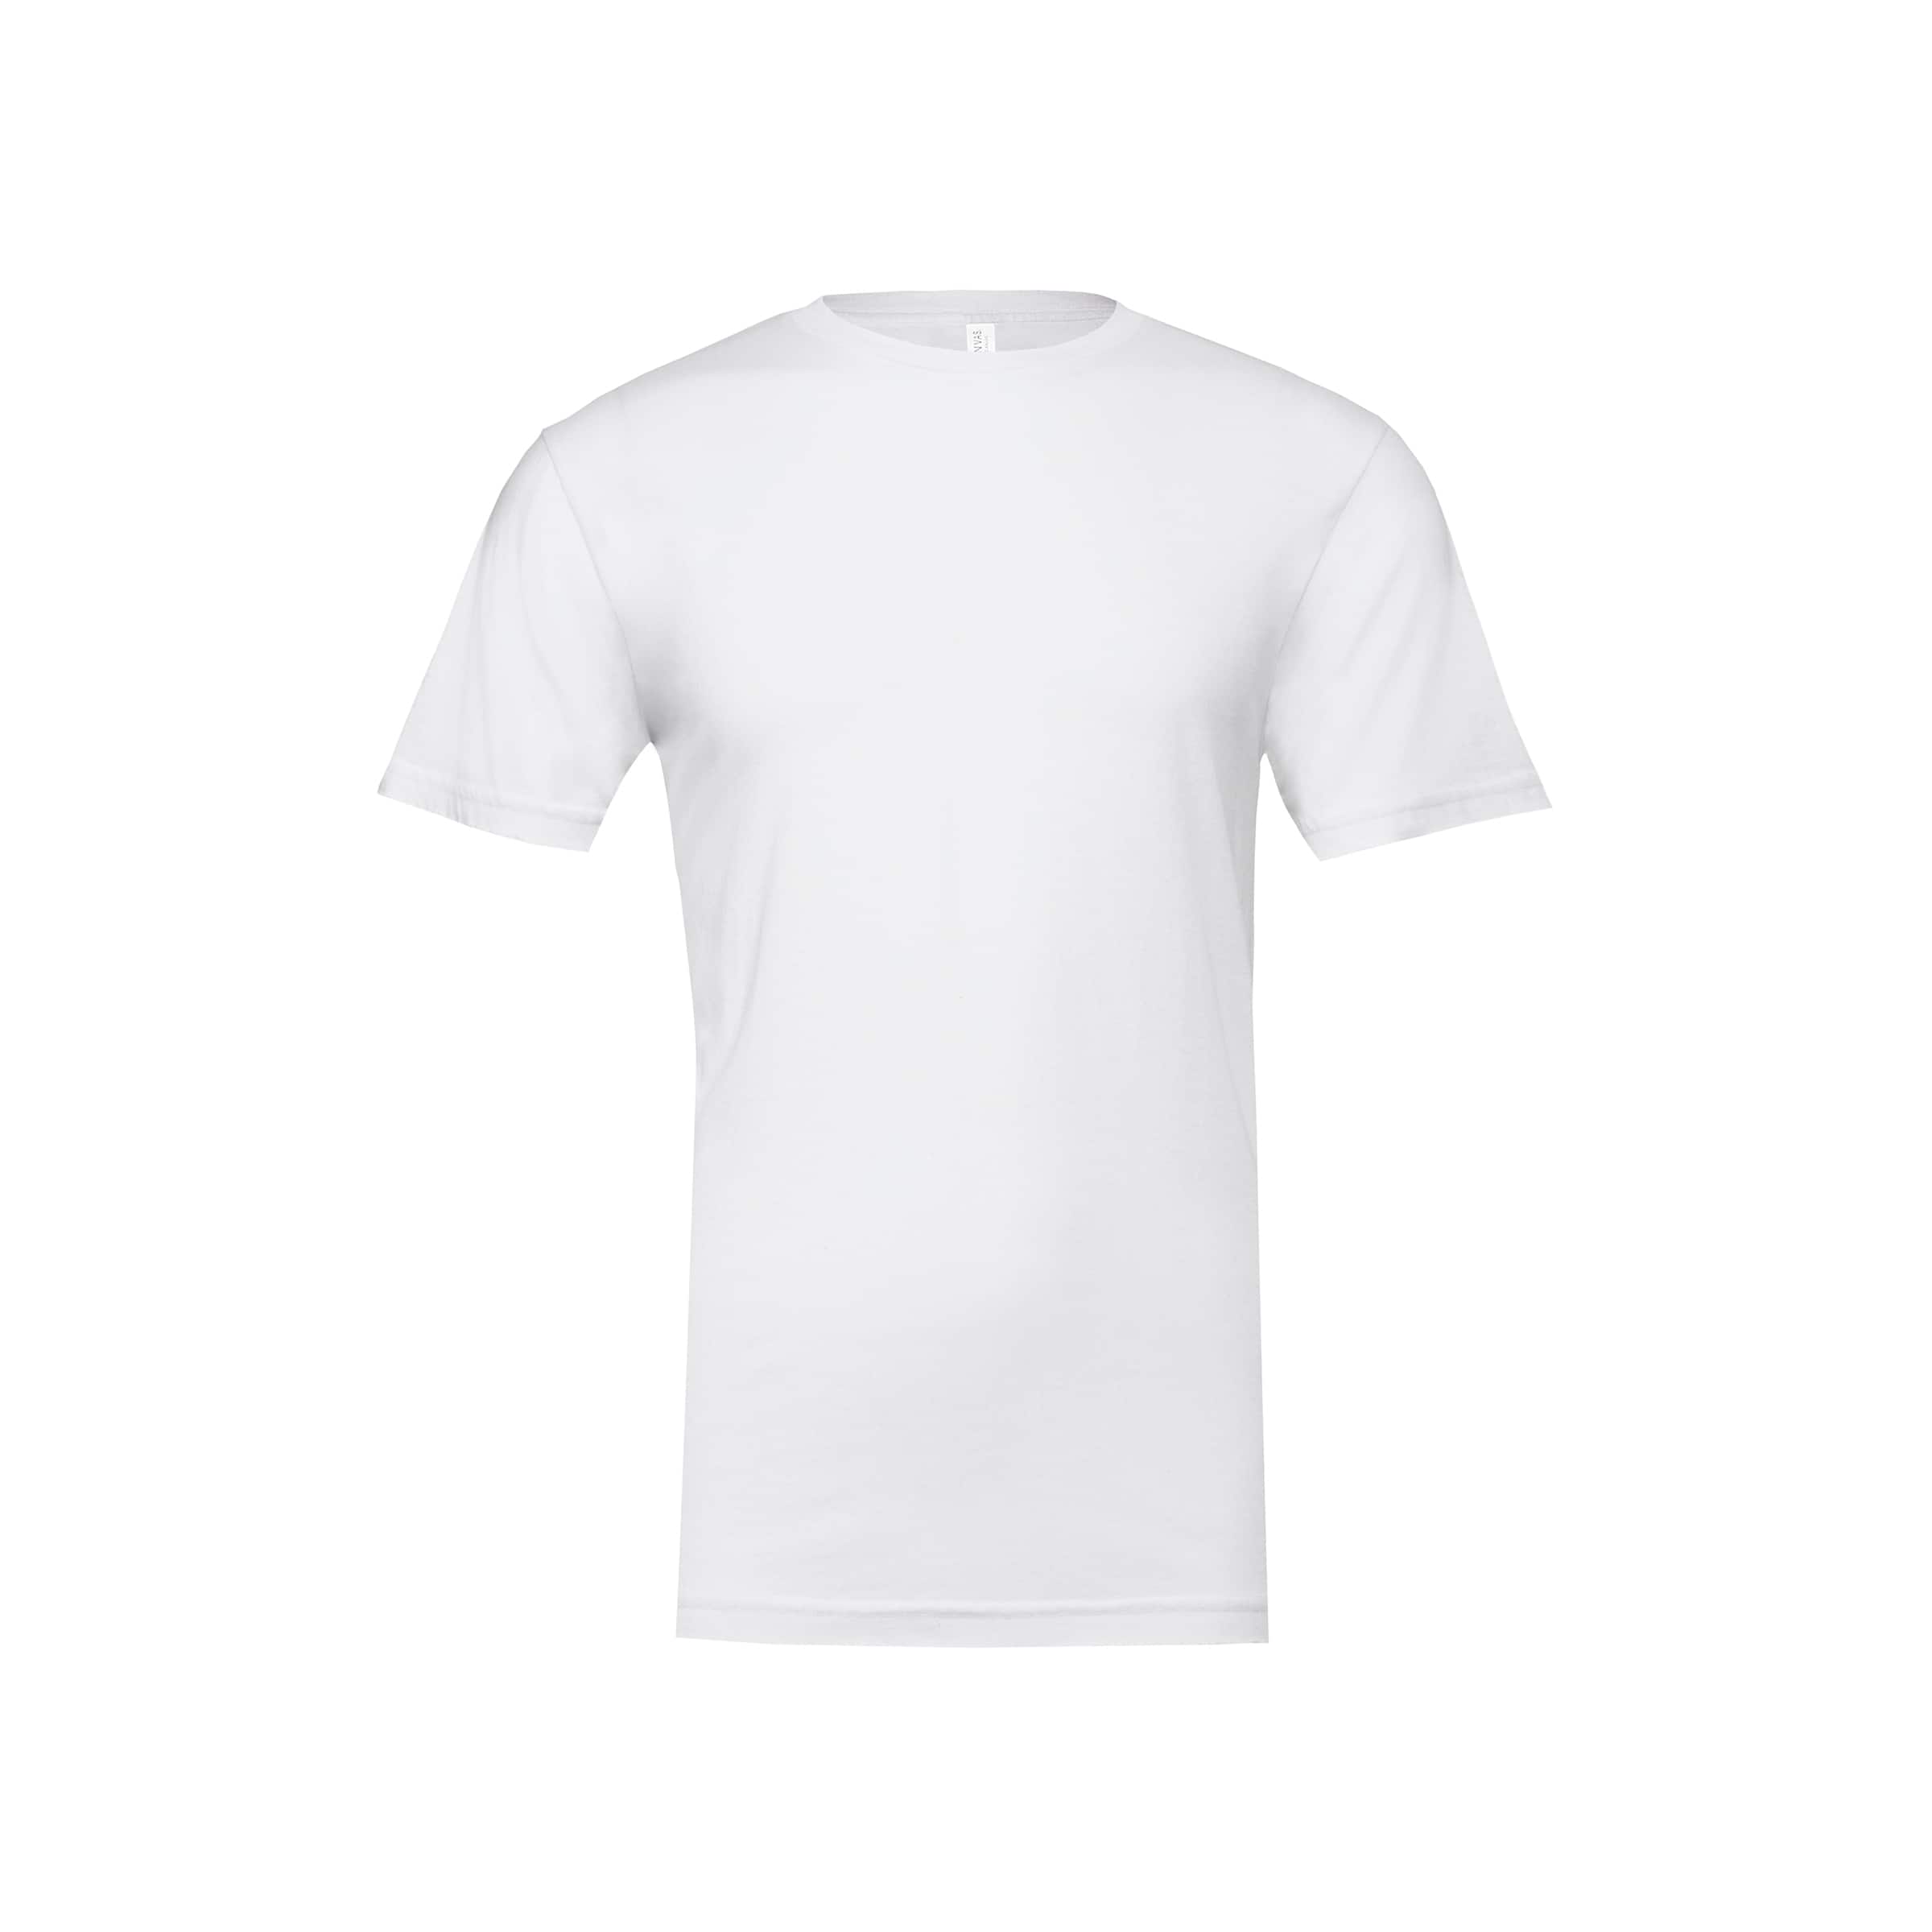 White Adult Polyester Crew Neck T-Shirt by Make Market®